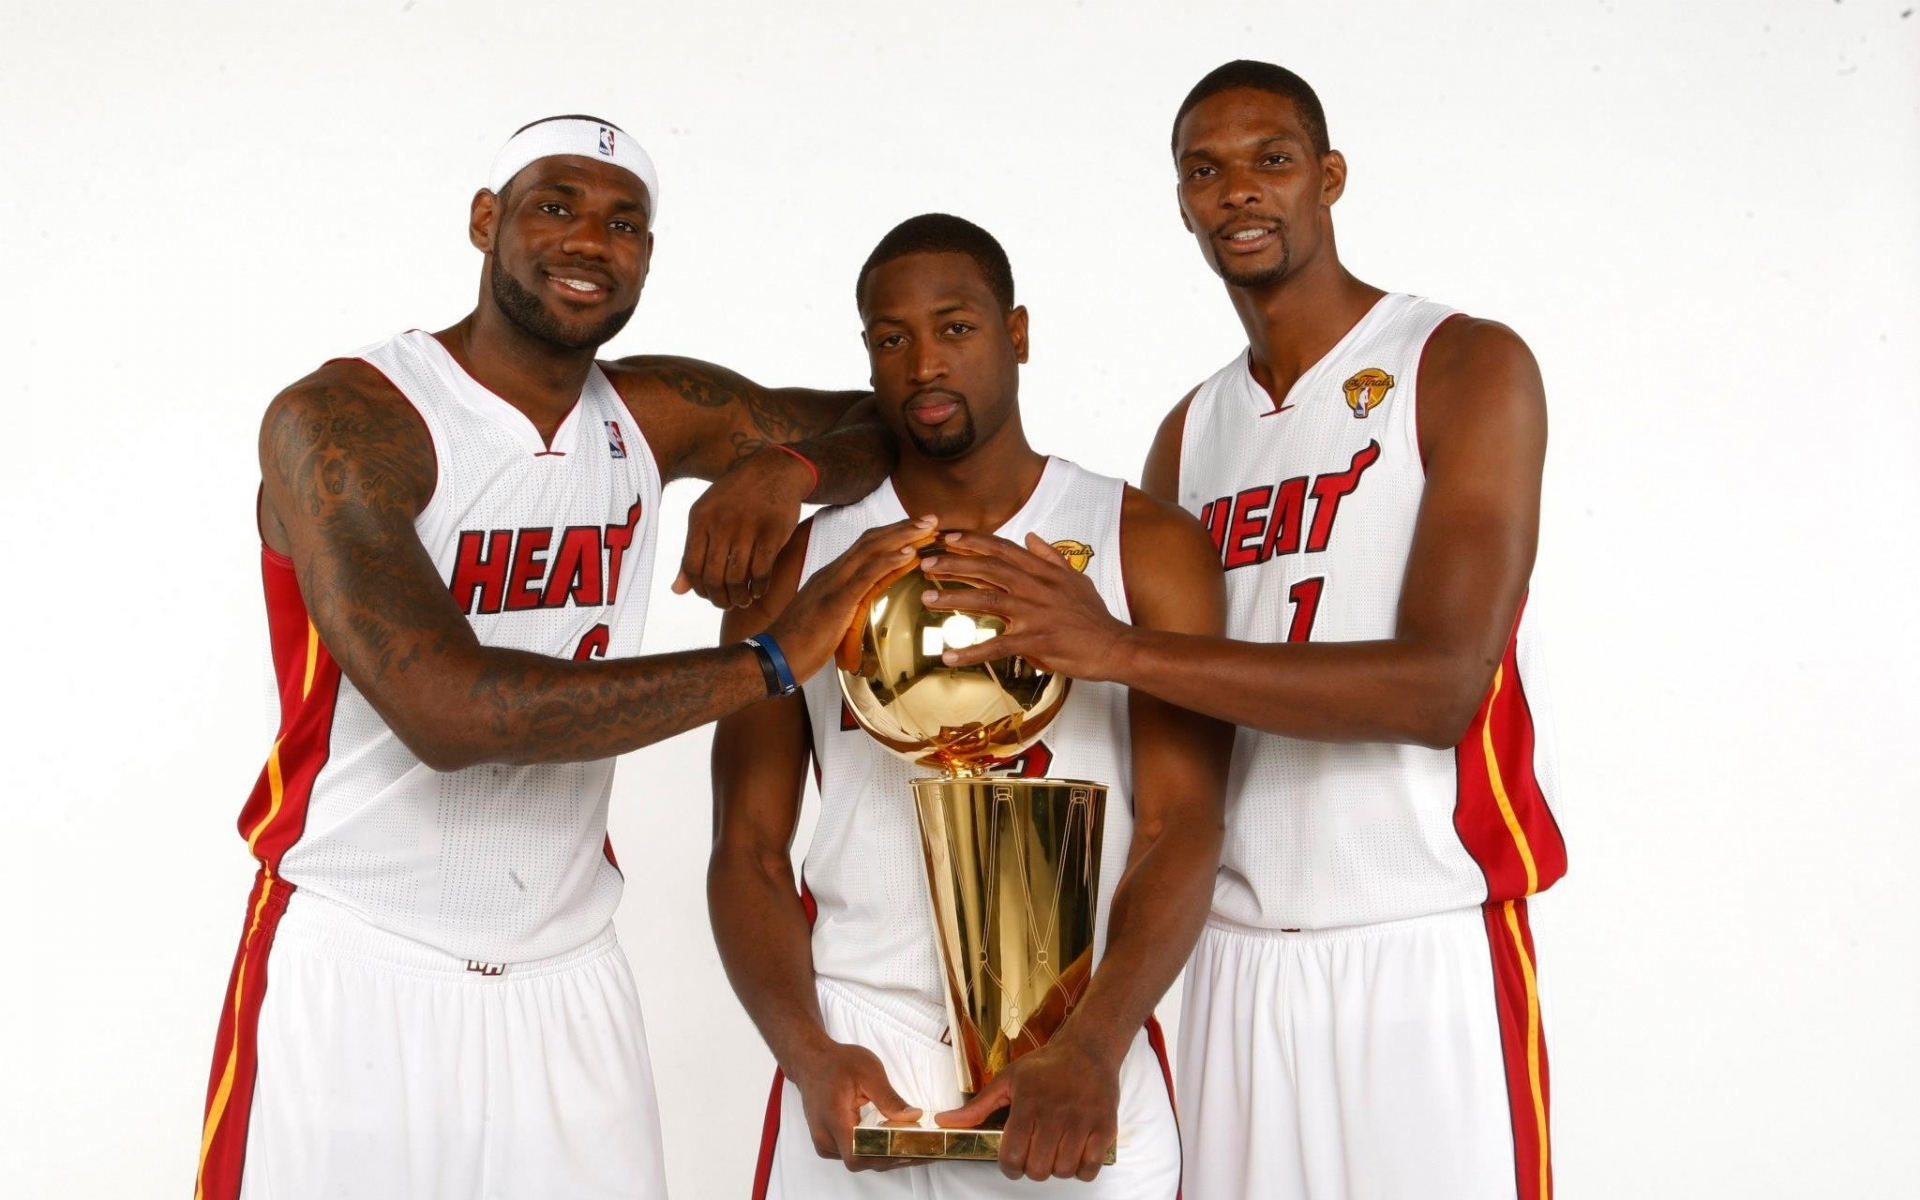 2013 Miami Heat vs. 2021 Brooklyn Nets: Which Superteam Comes Out